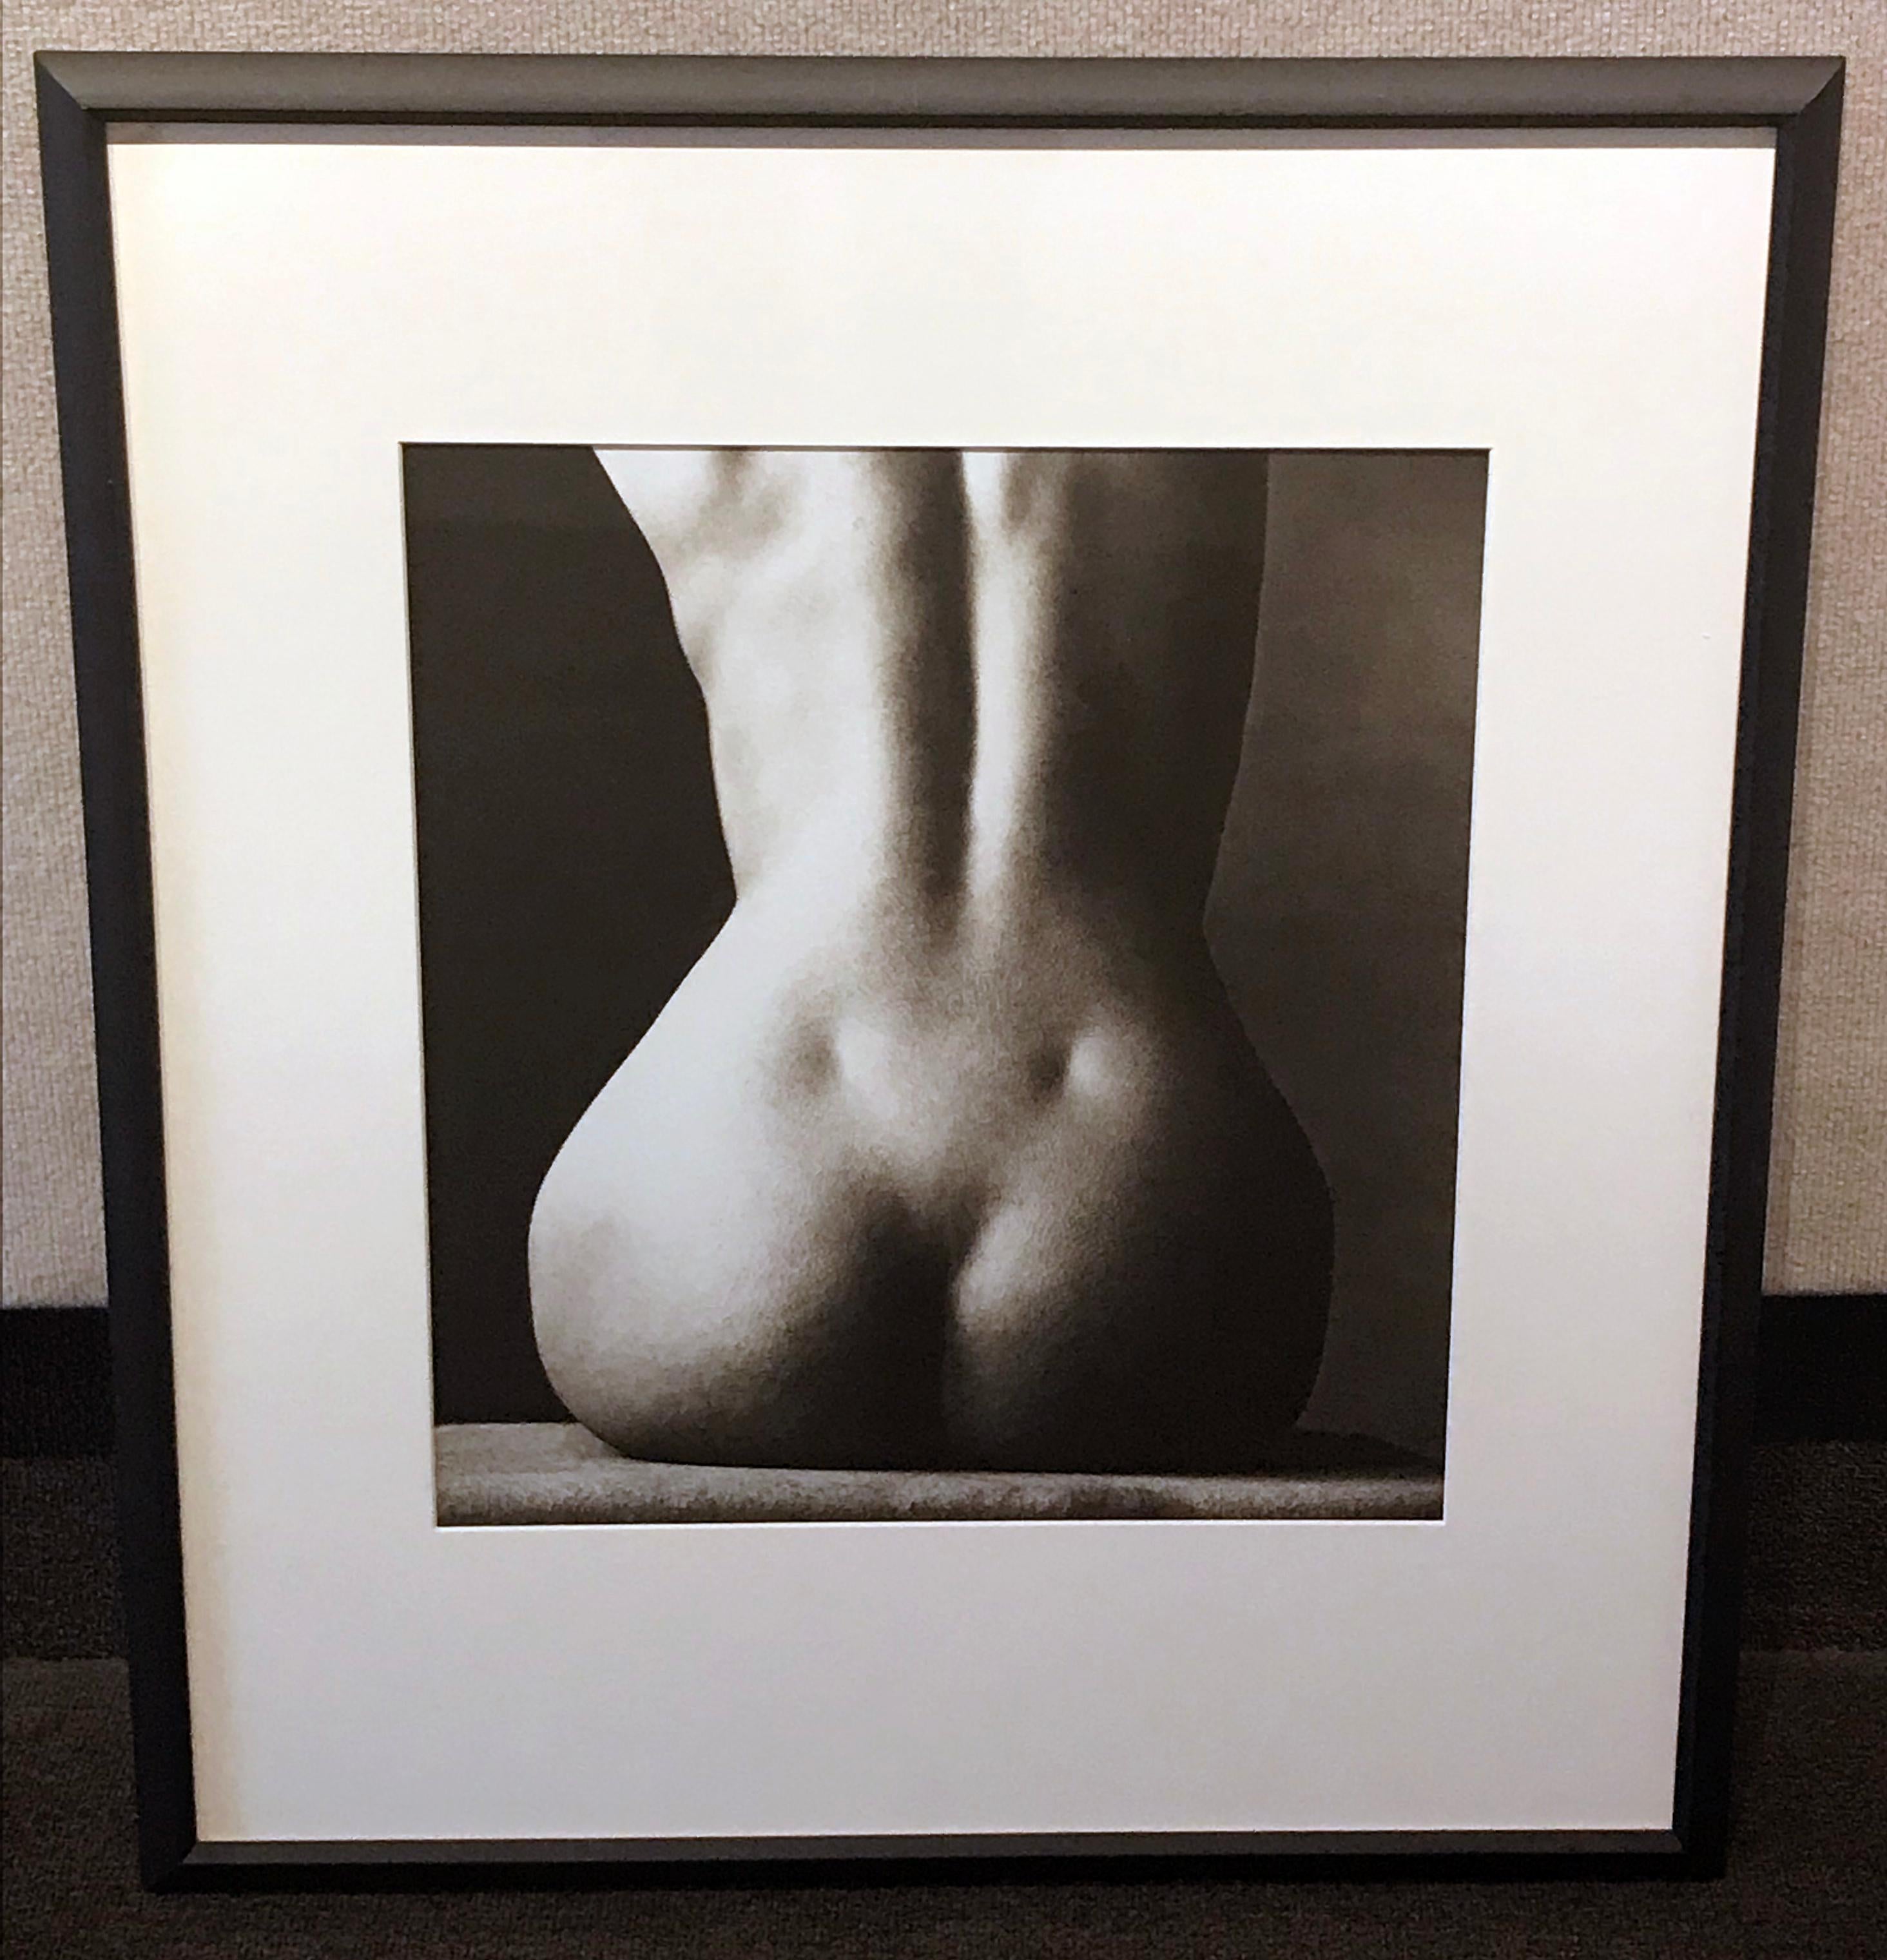 Sitting Nude Rear, New York, 1993 - Photograph by Irving Penn